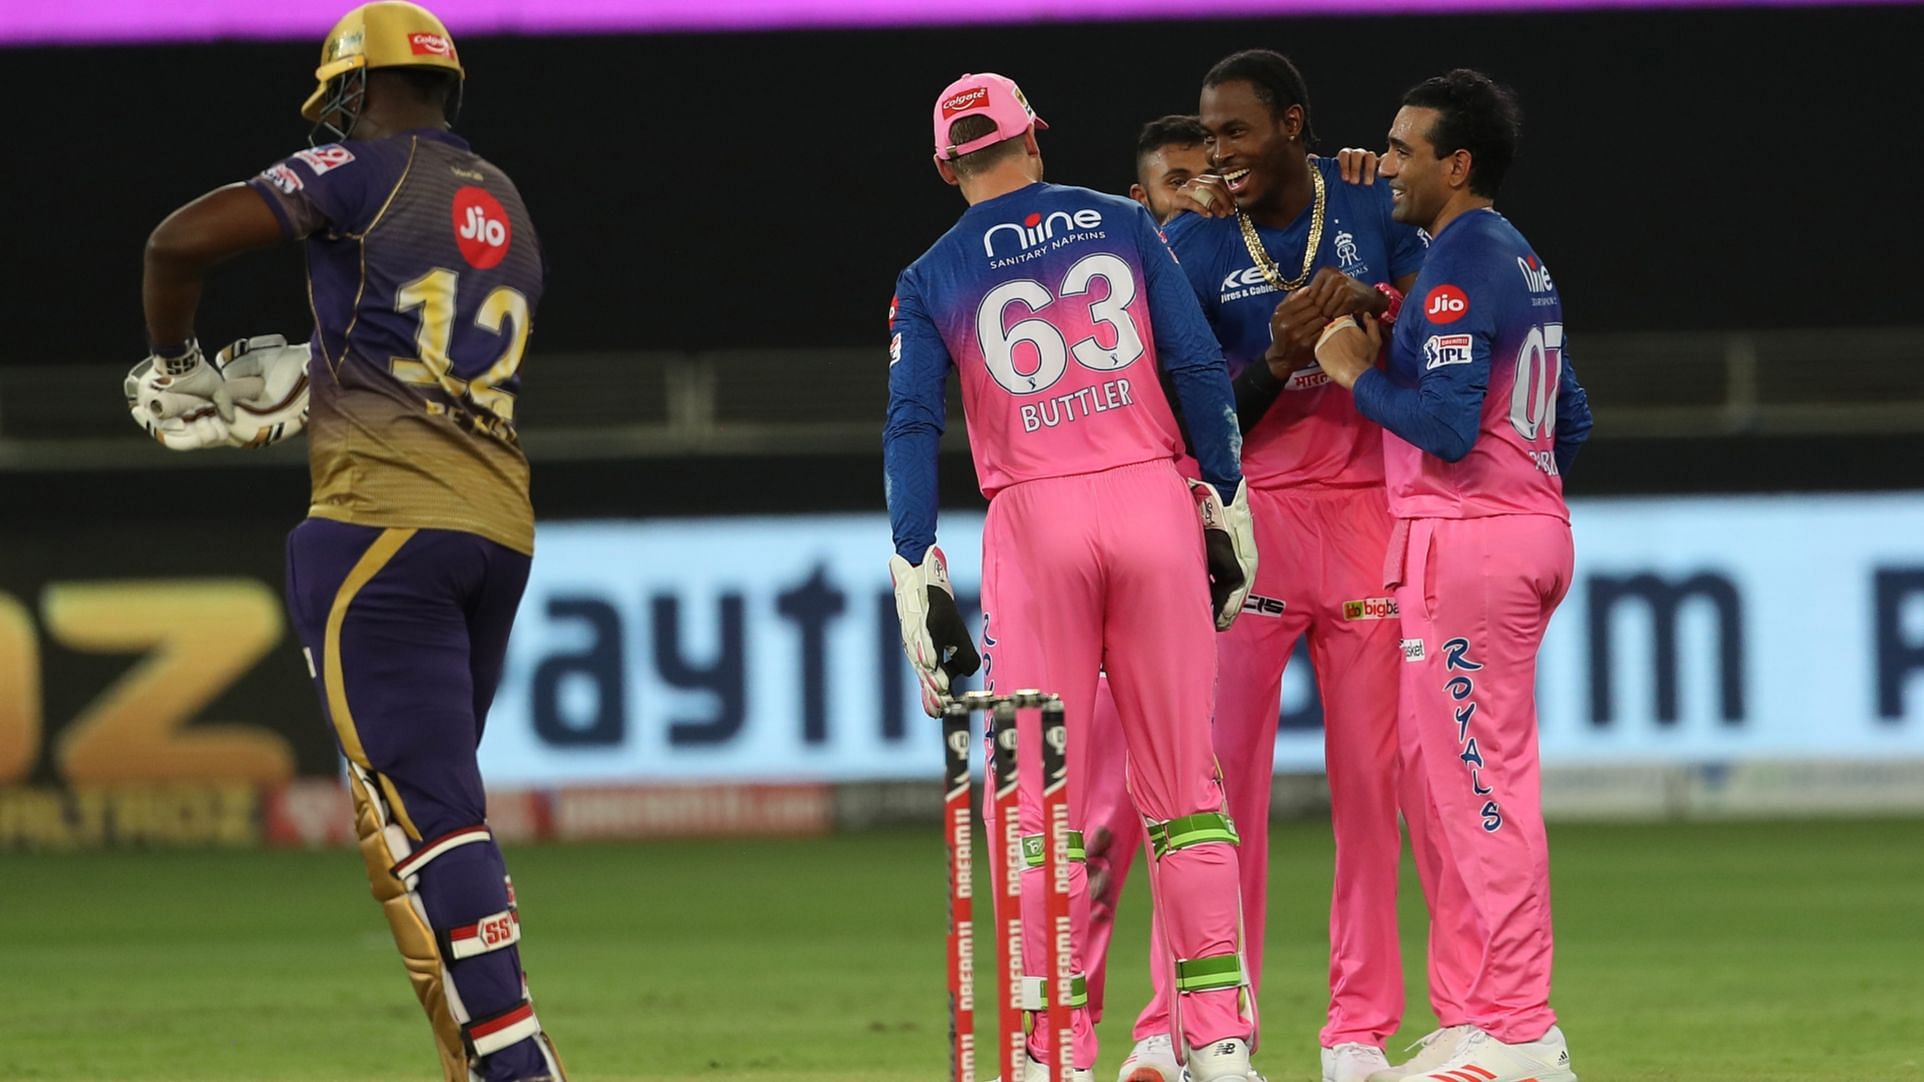 Kolkata Knight Riders defeated Rajasthan Royals by 37 runs the last time these two teams met in IPL 2020.